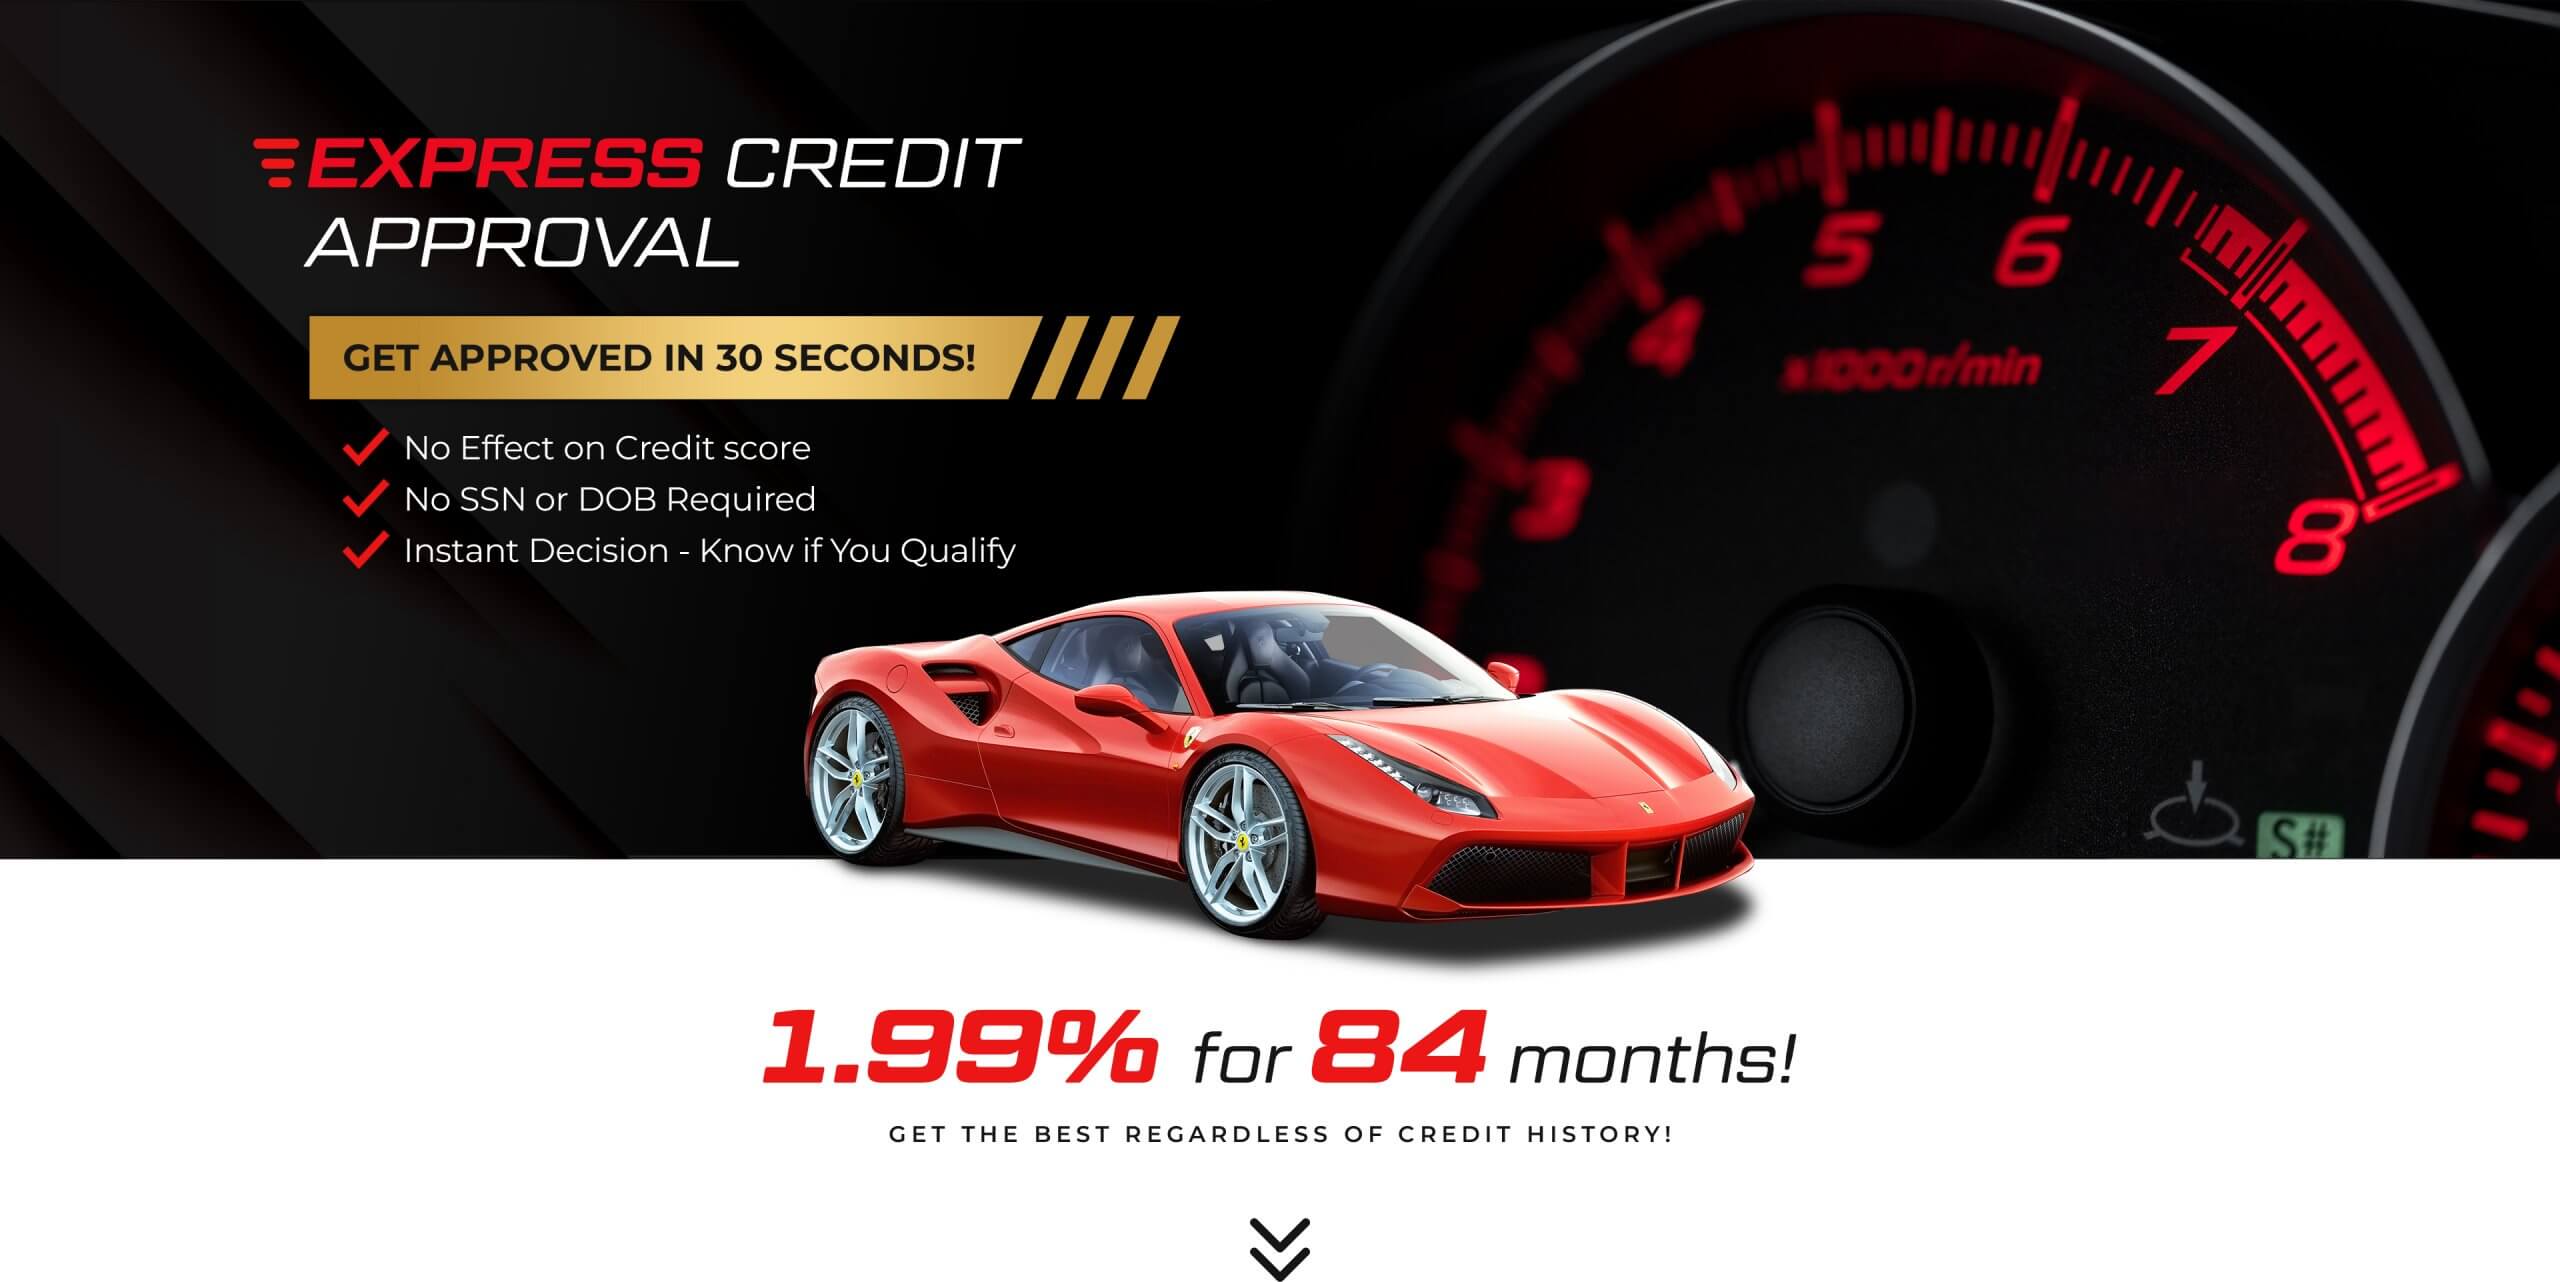 Express credit approval. Get approved in 30 seconds. 1.99% for 84 months. Get the best reguardless of credit history!